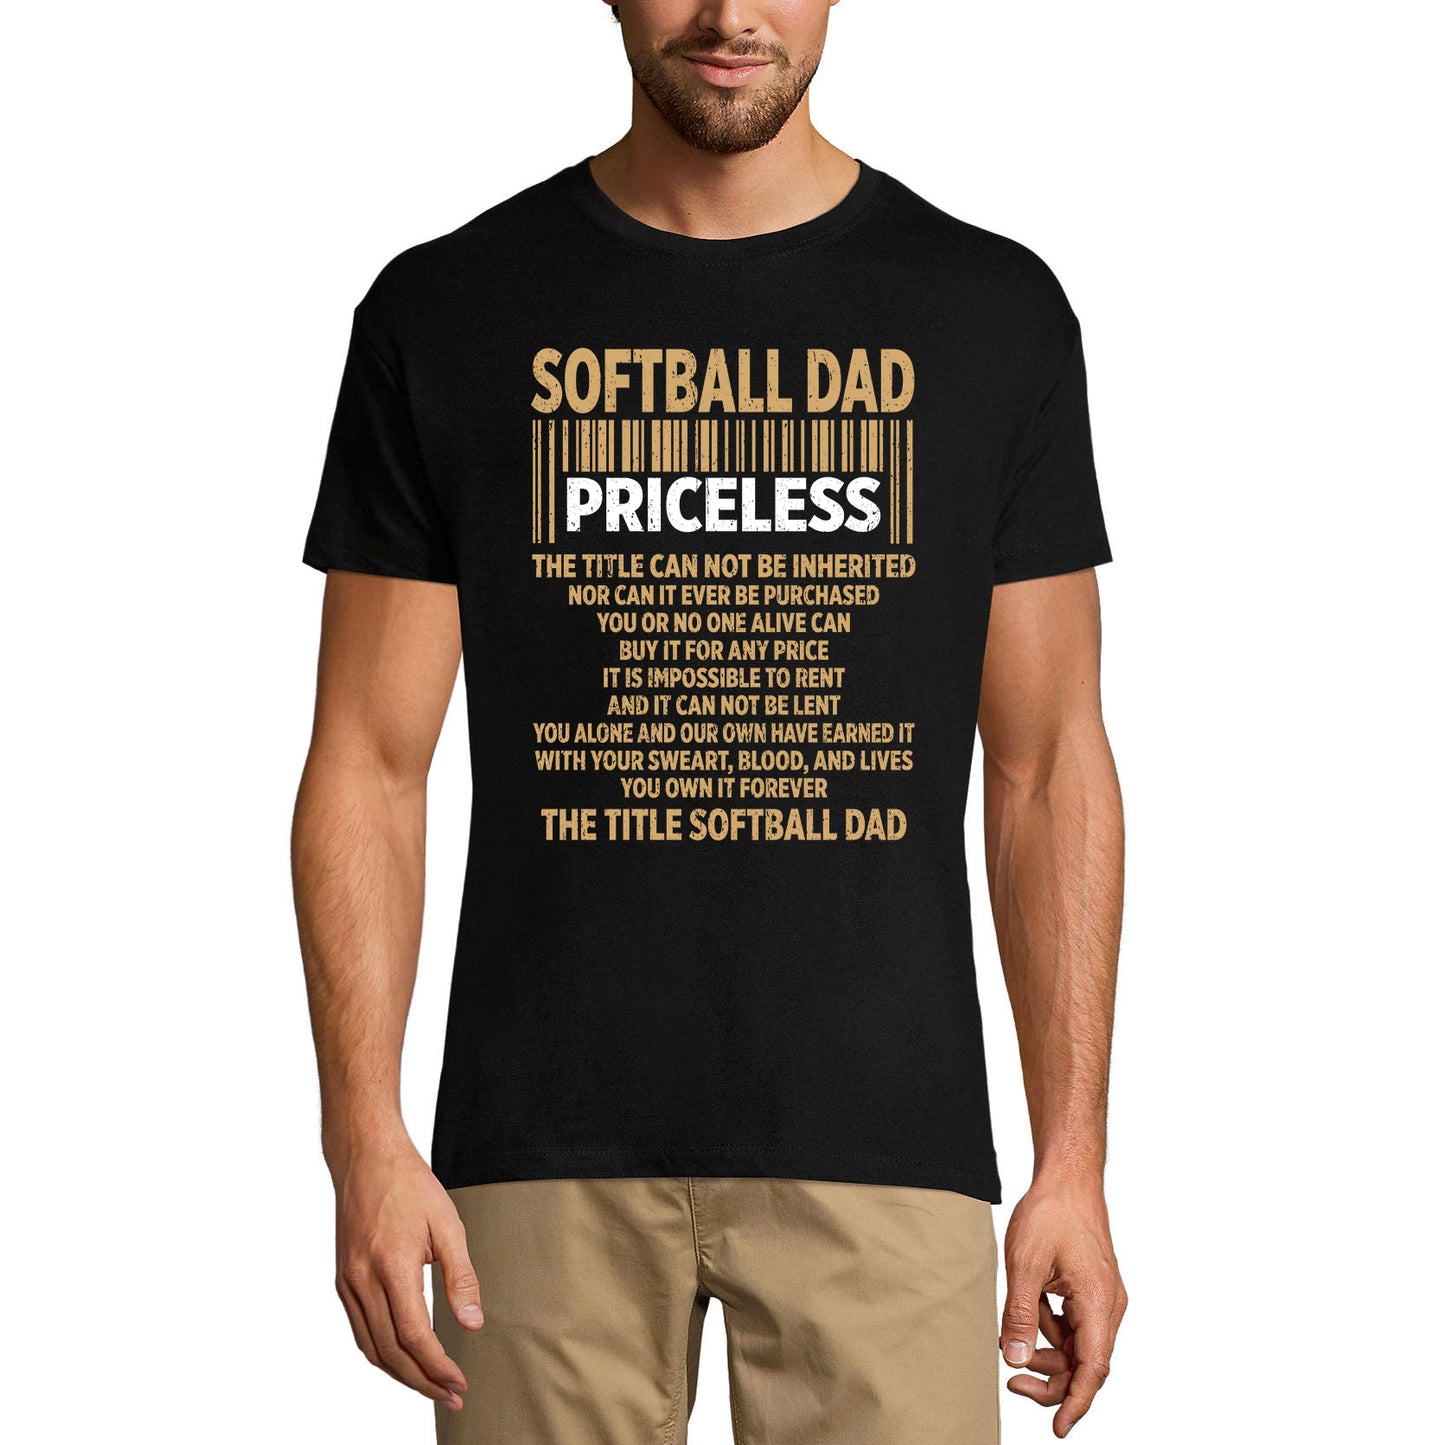 ULTRABASIC Men's Graphic T-Shirt Softball Dad Priceless - Gift For Father's Day